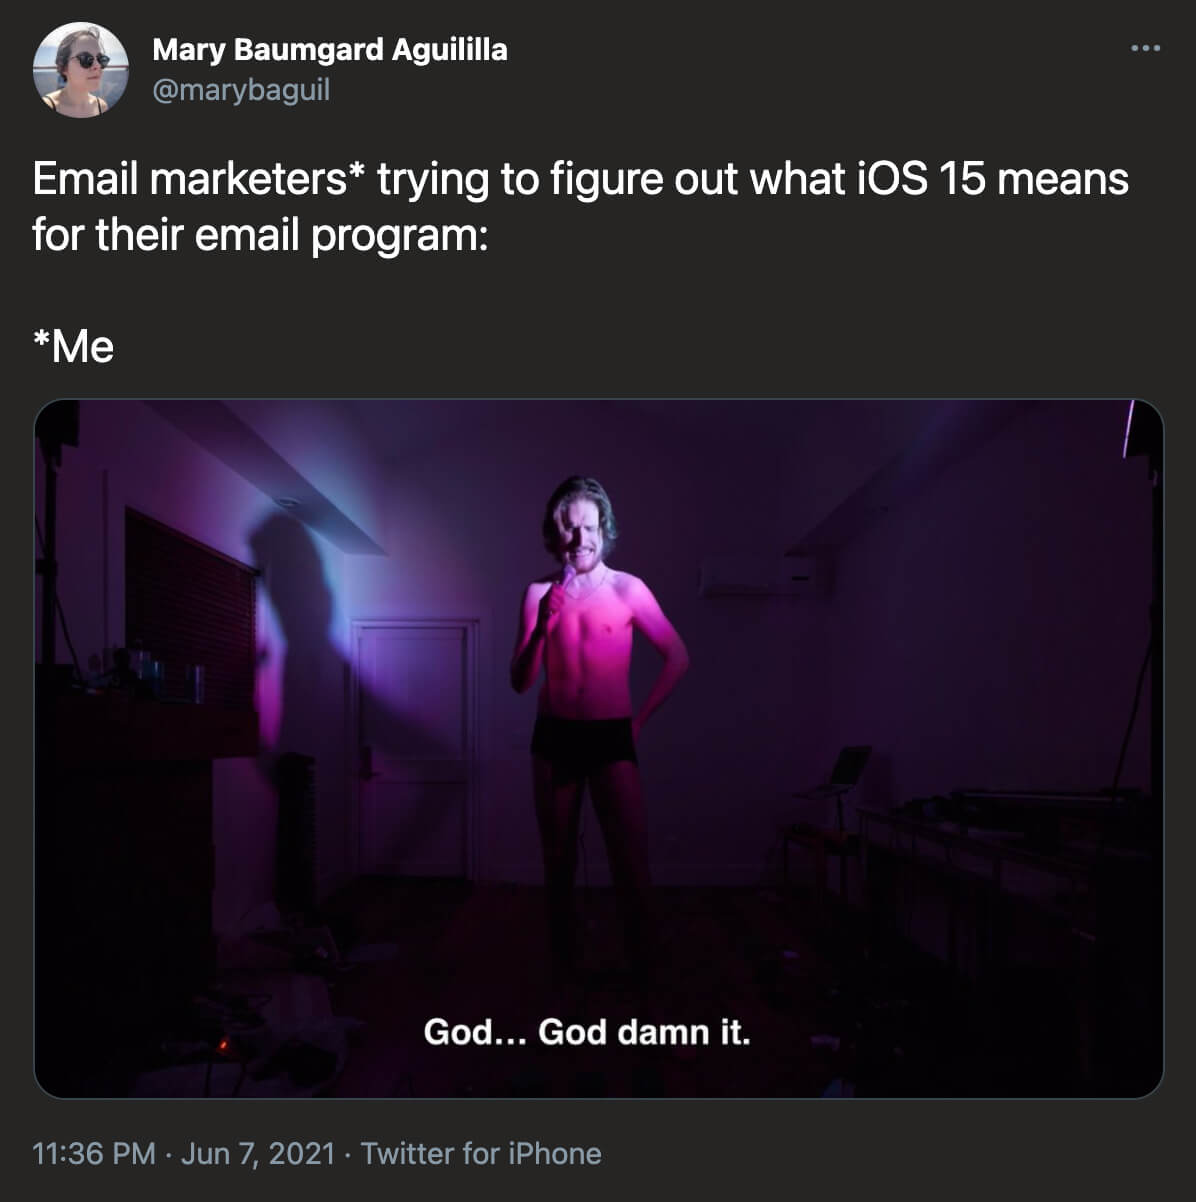 @marybaguil on twitter: Emailer marketers* trying to figure out what iOS 15 means for their email program: Bo Burnham with a blue and pink spotlight on him saying 'God...God damn it.'  *Me